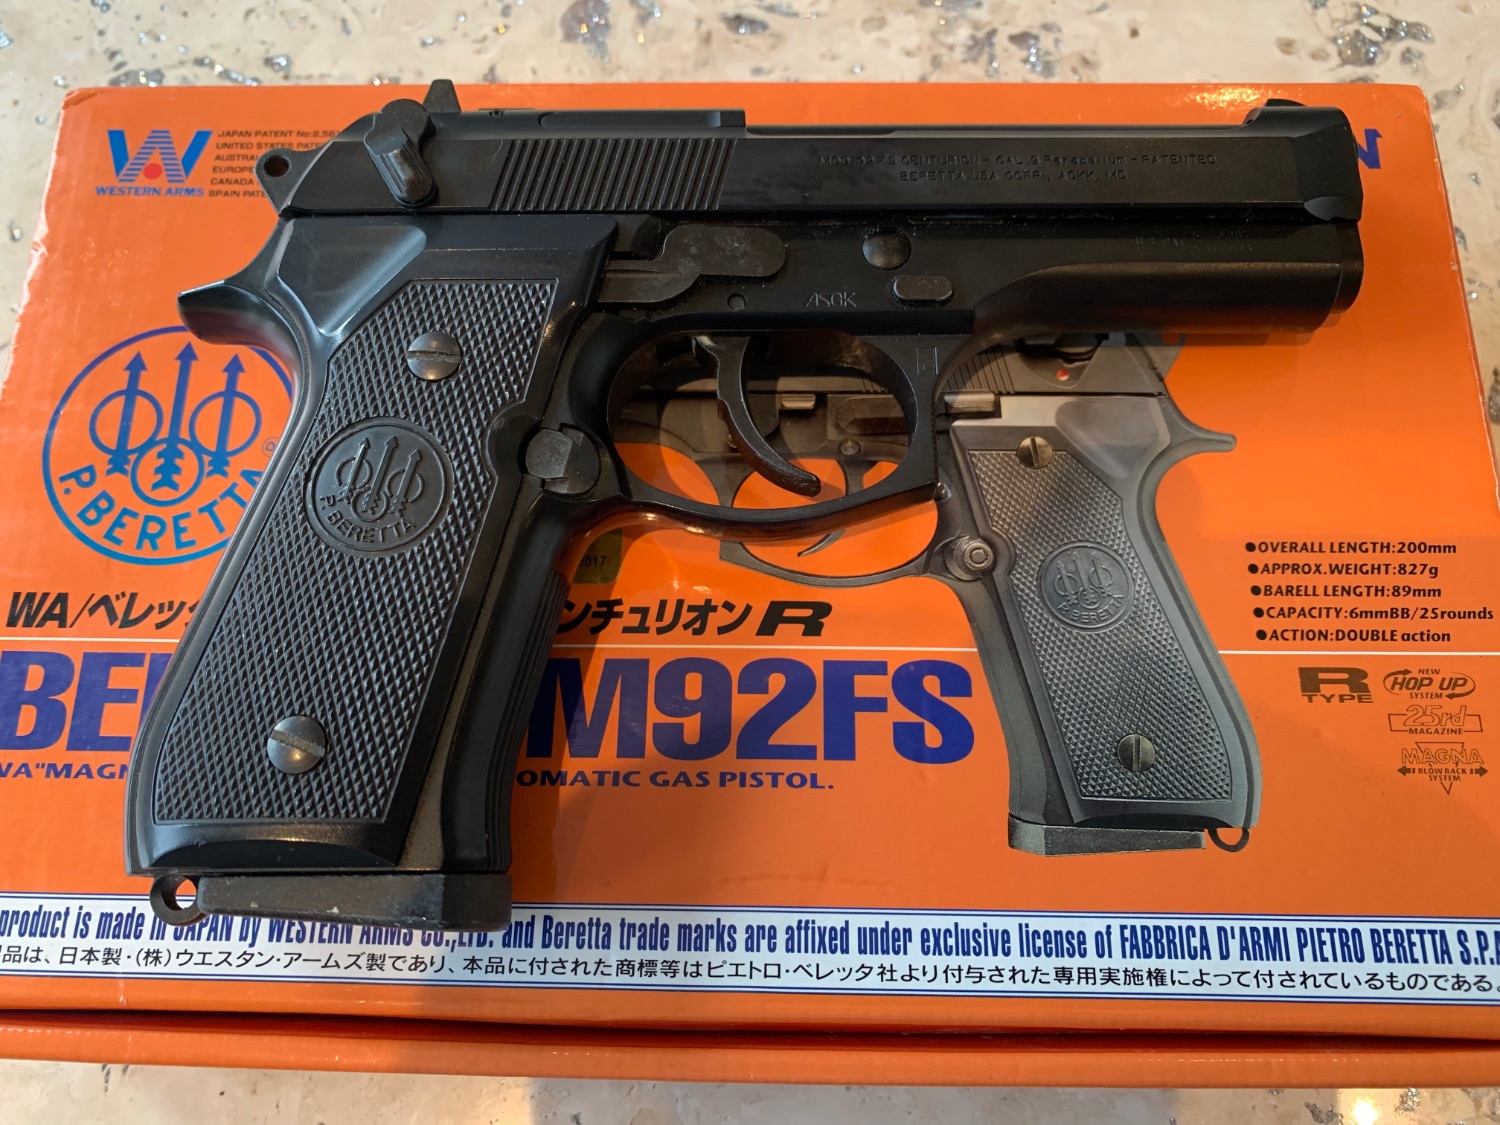 Western Arms Beretta M92FS Gas Pistols Airsoft Forums UK